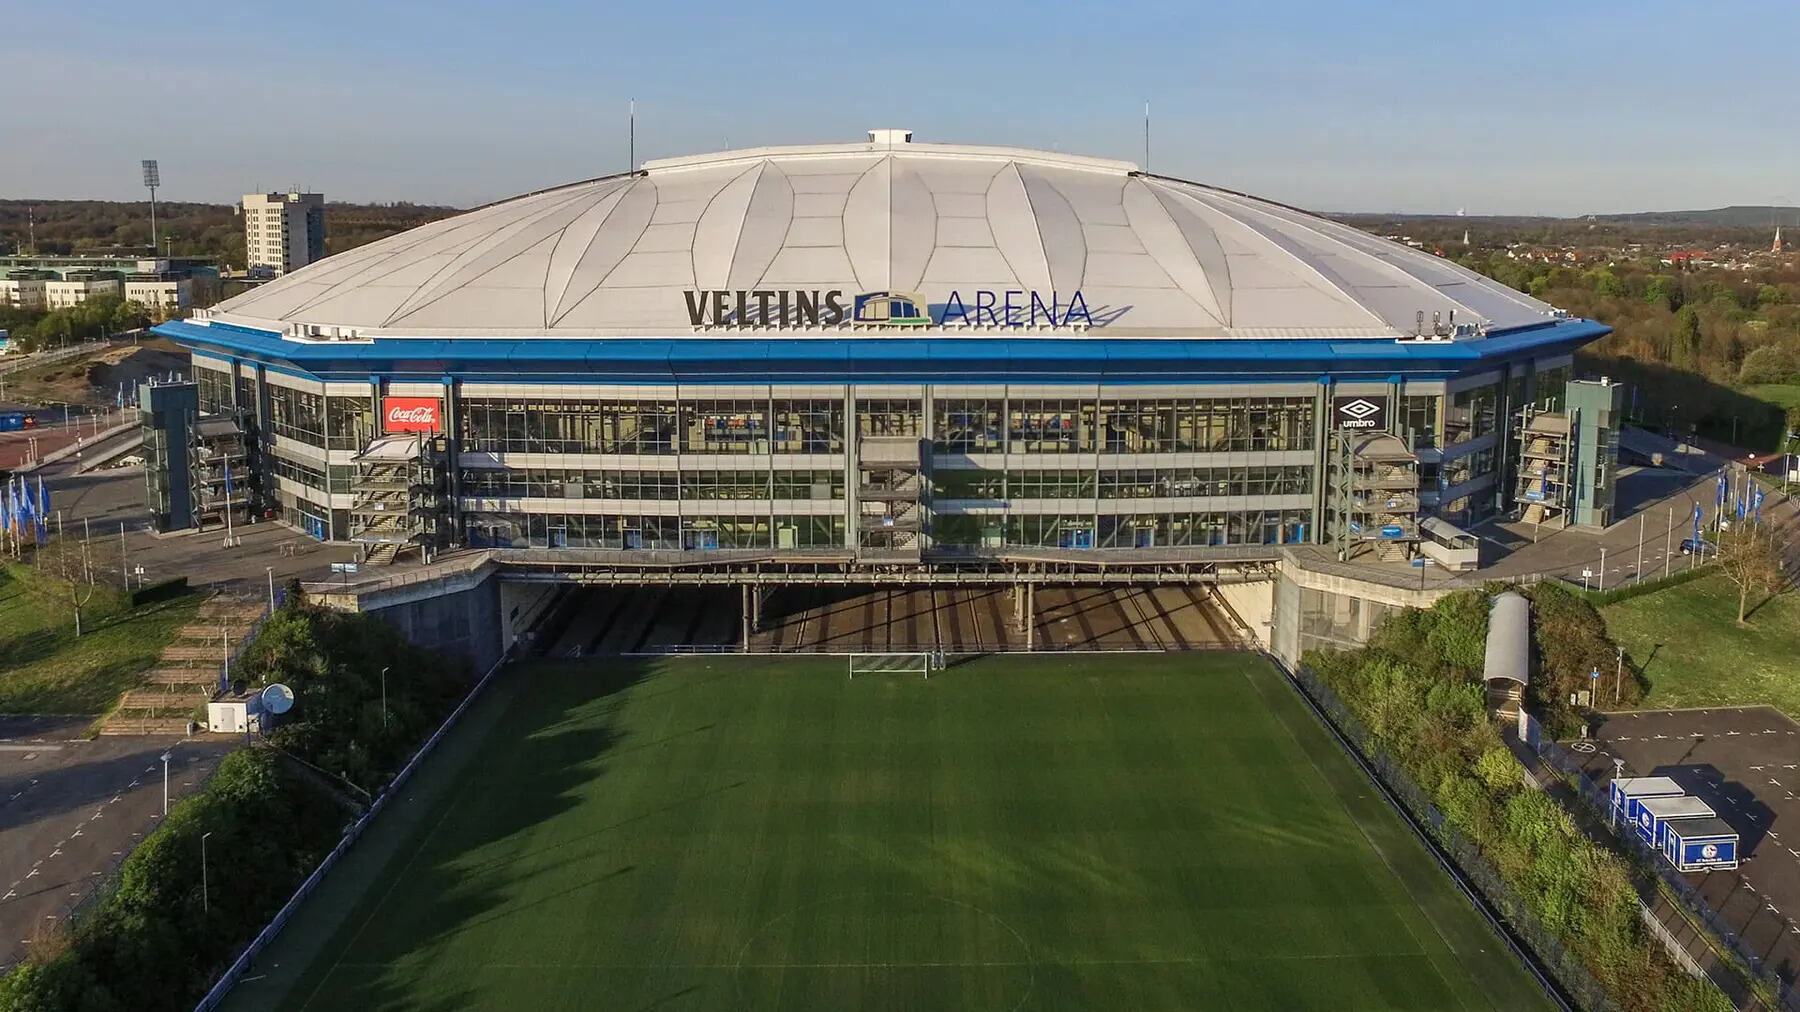 20-mind-blowing-facts-about-veltins-arena